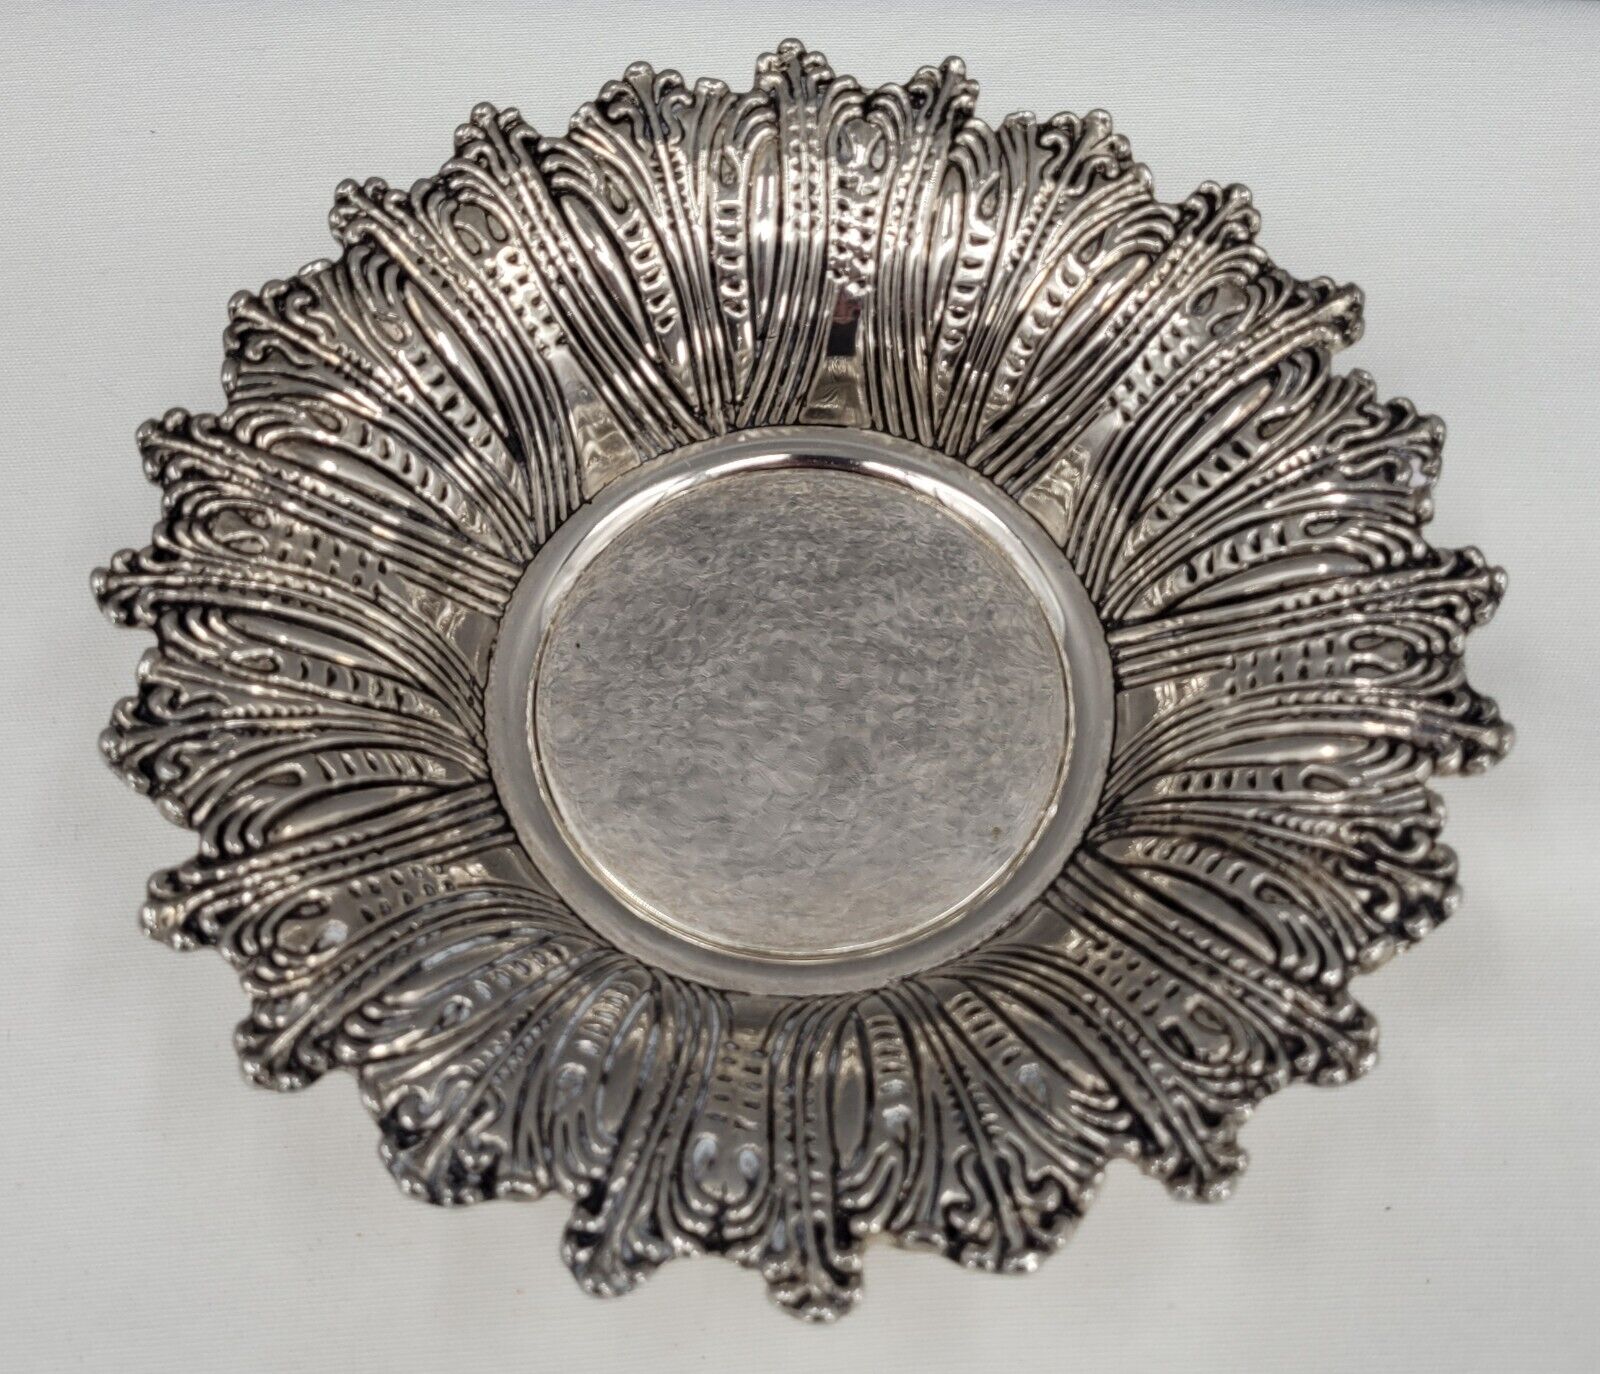 Godinger Silver Plated Bowl Scalloped Edges 7 Inch Round